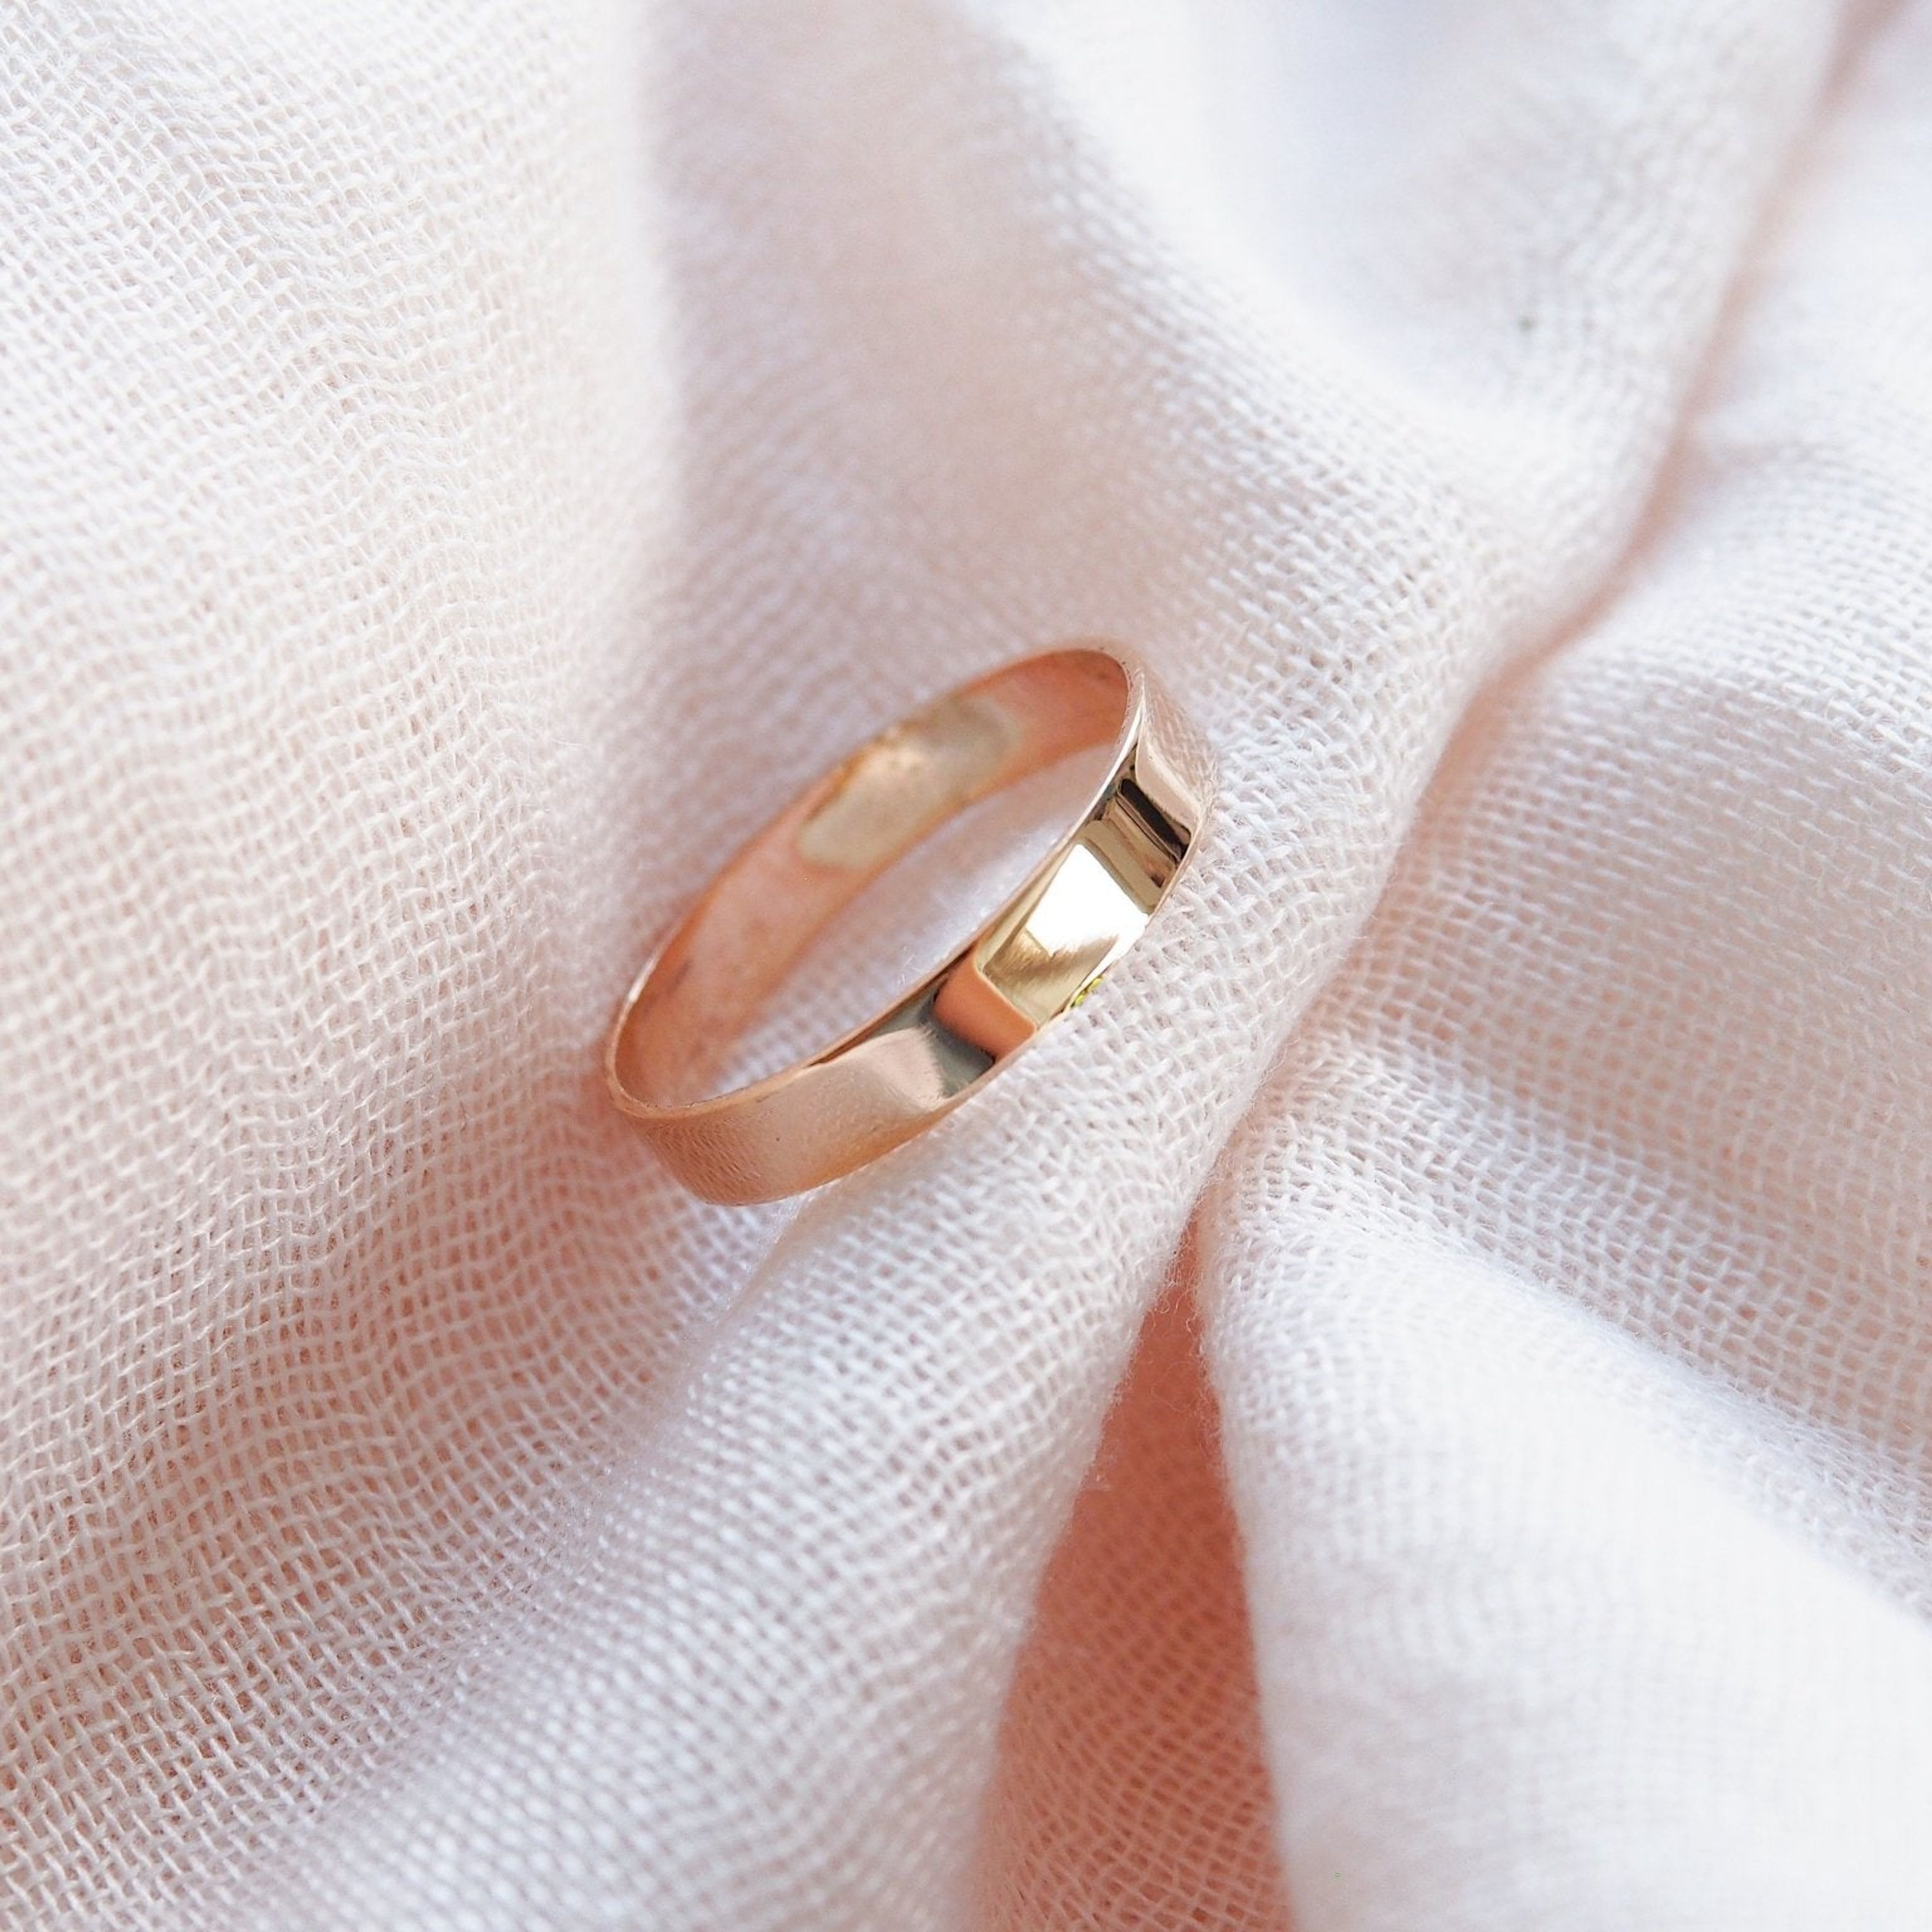 Sale - Thick Wide Gold Ring - Koa